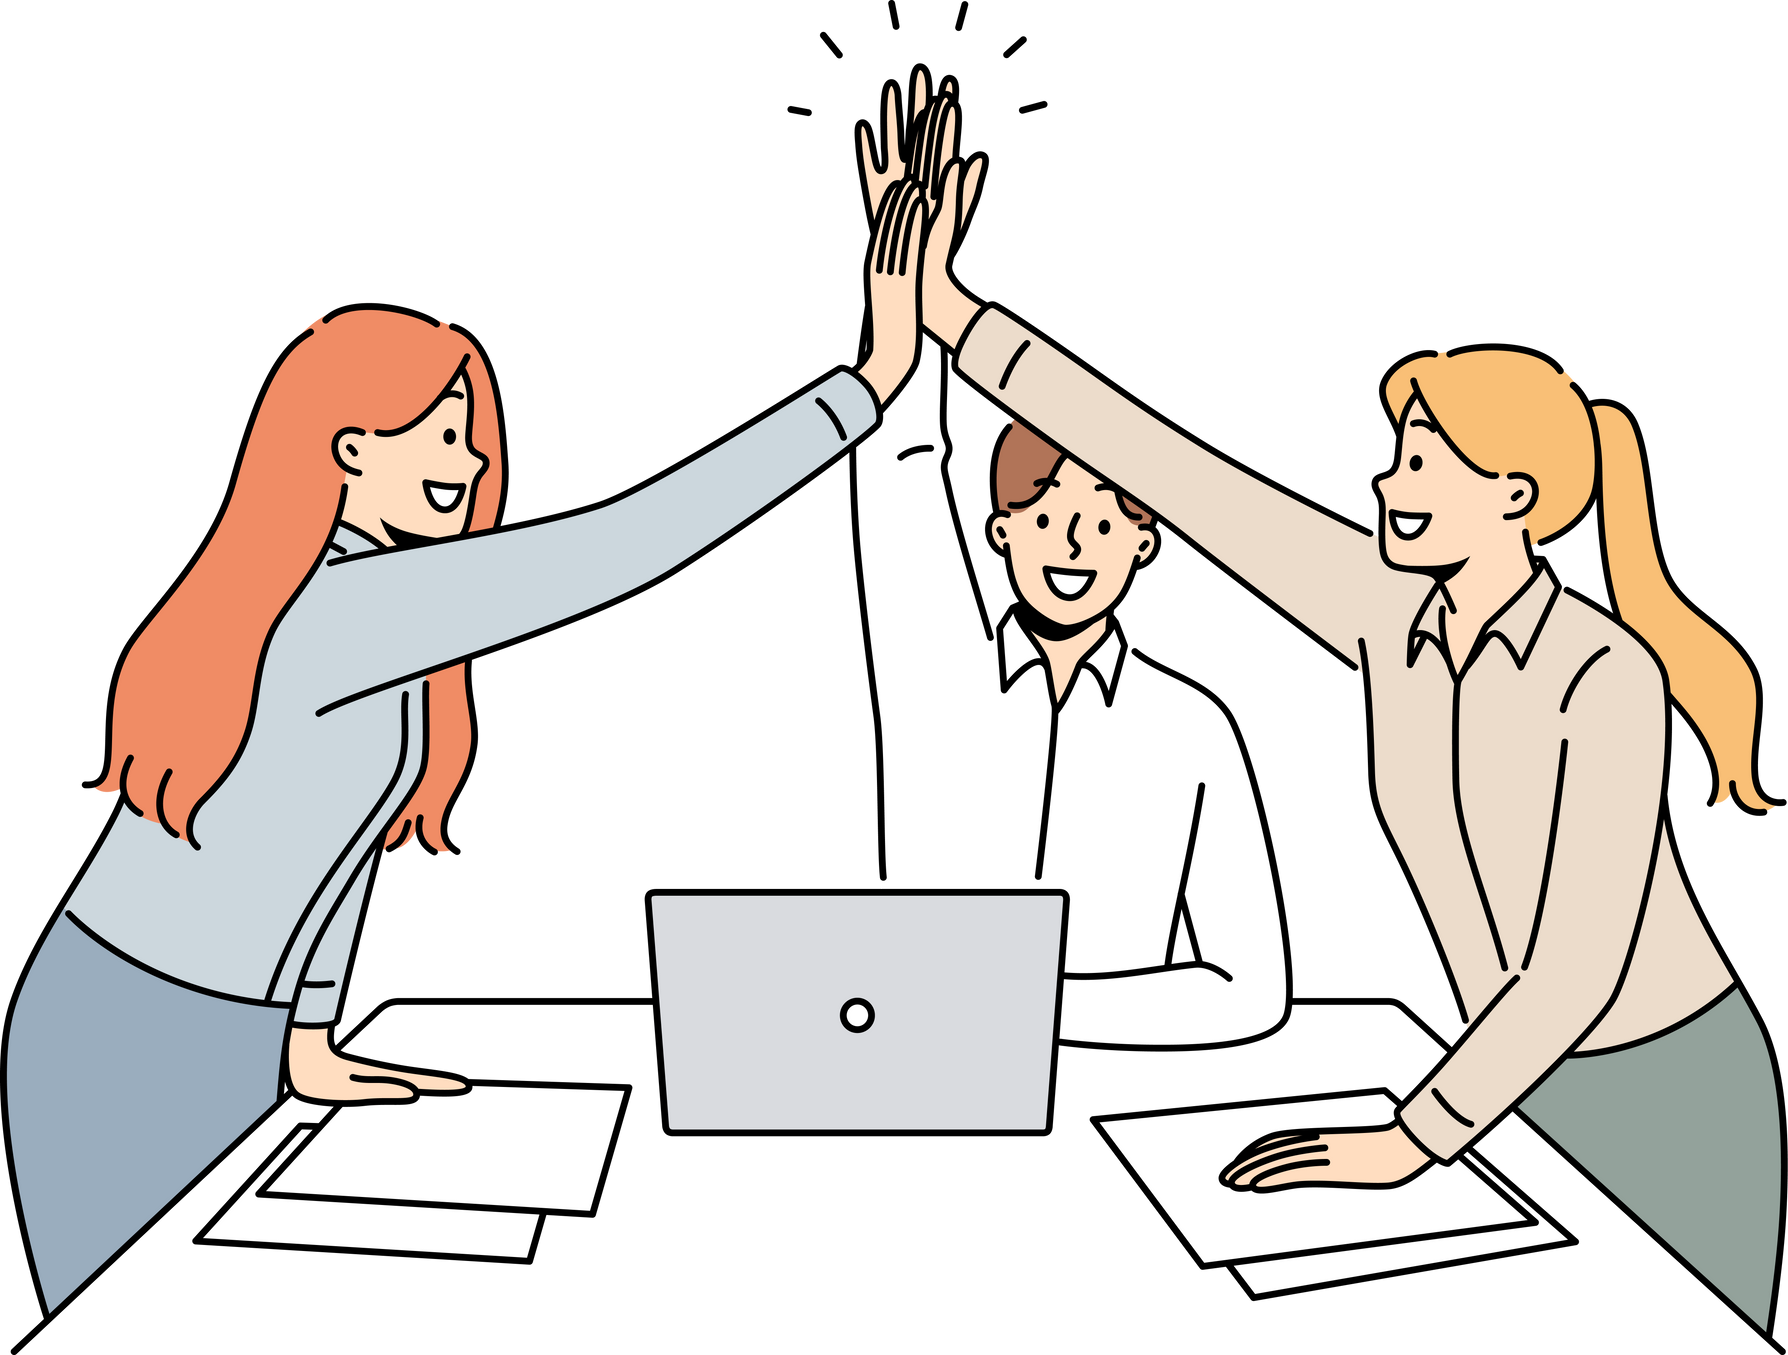 Successful business team rejoicing at completion of project, standing near desk and giving high five